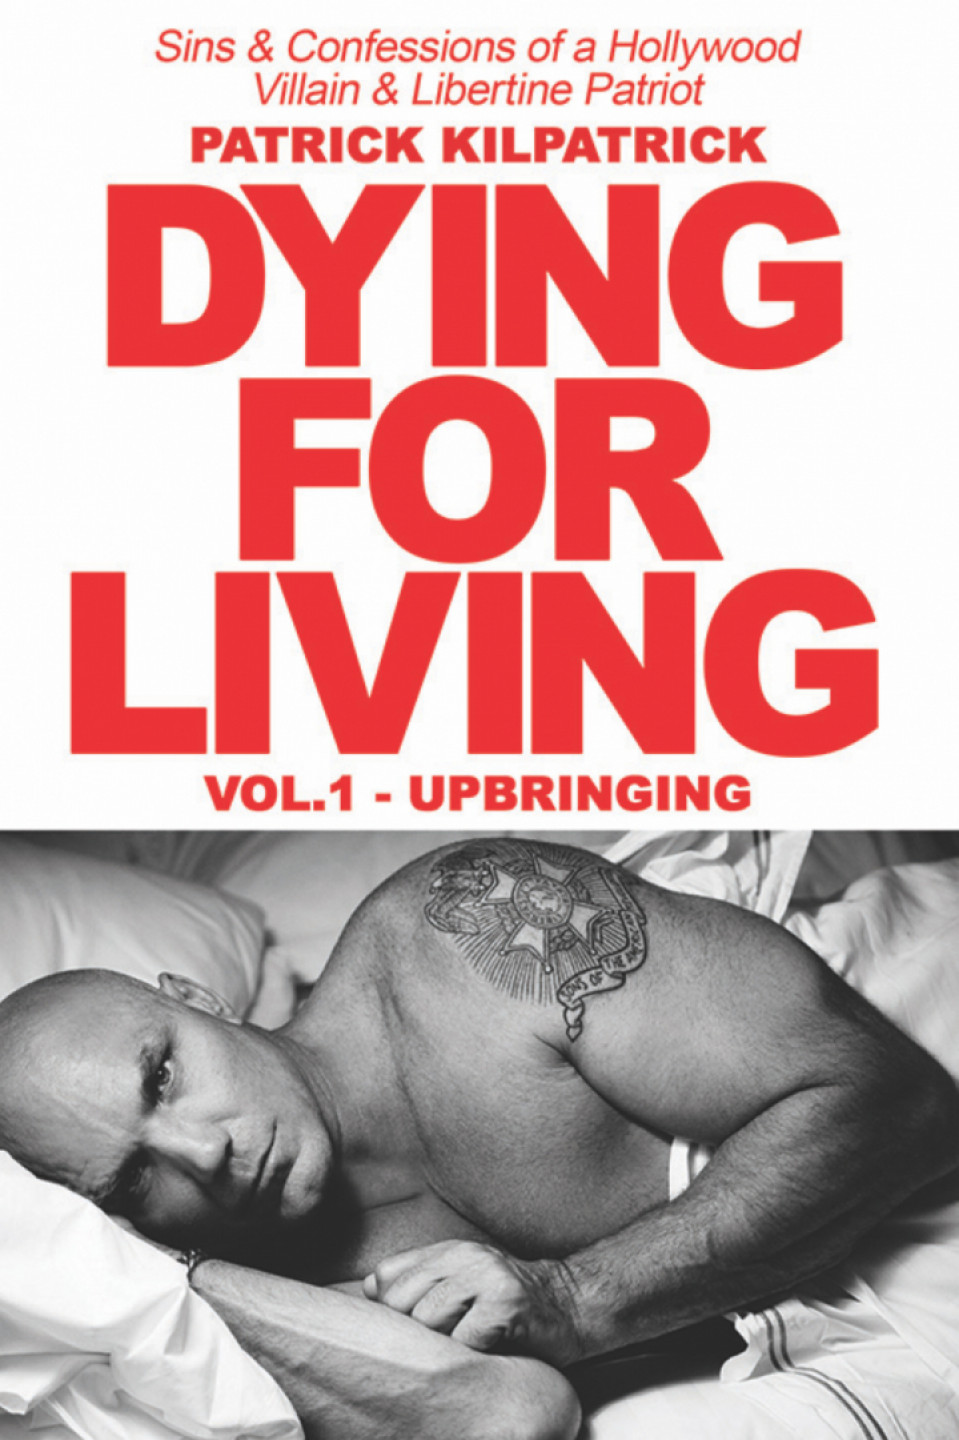 Actor Patrick Kilpatrick Discusses and Signs his New Book Dying for Living: Sins & Confessions of a Hollywood Villain & Libertine Patriot 